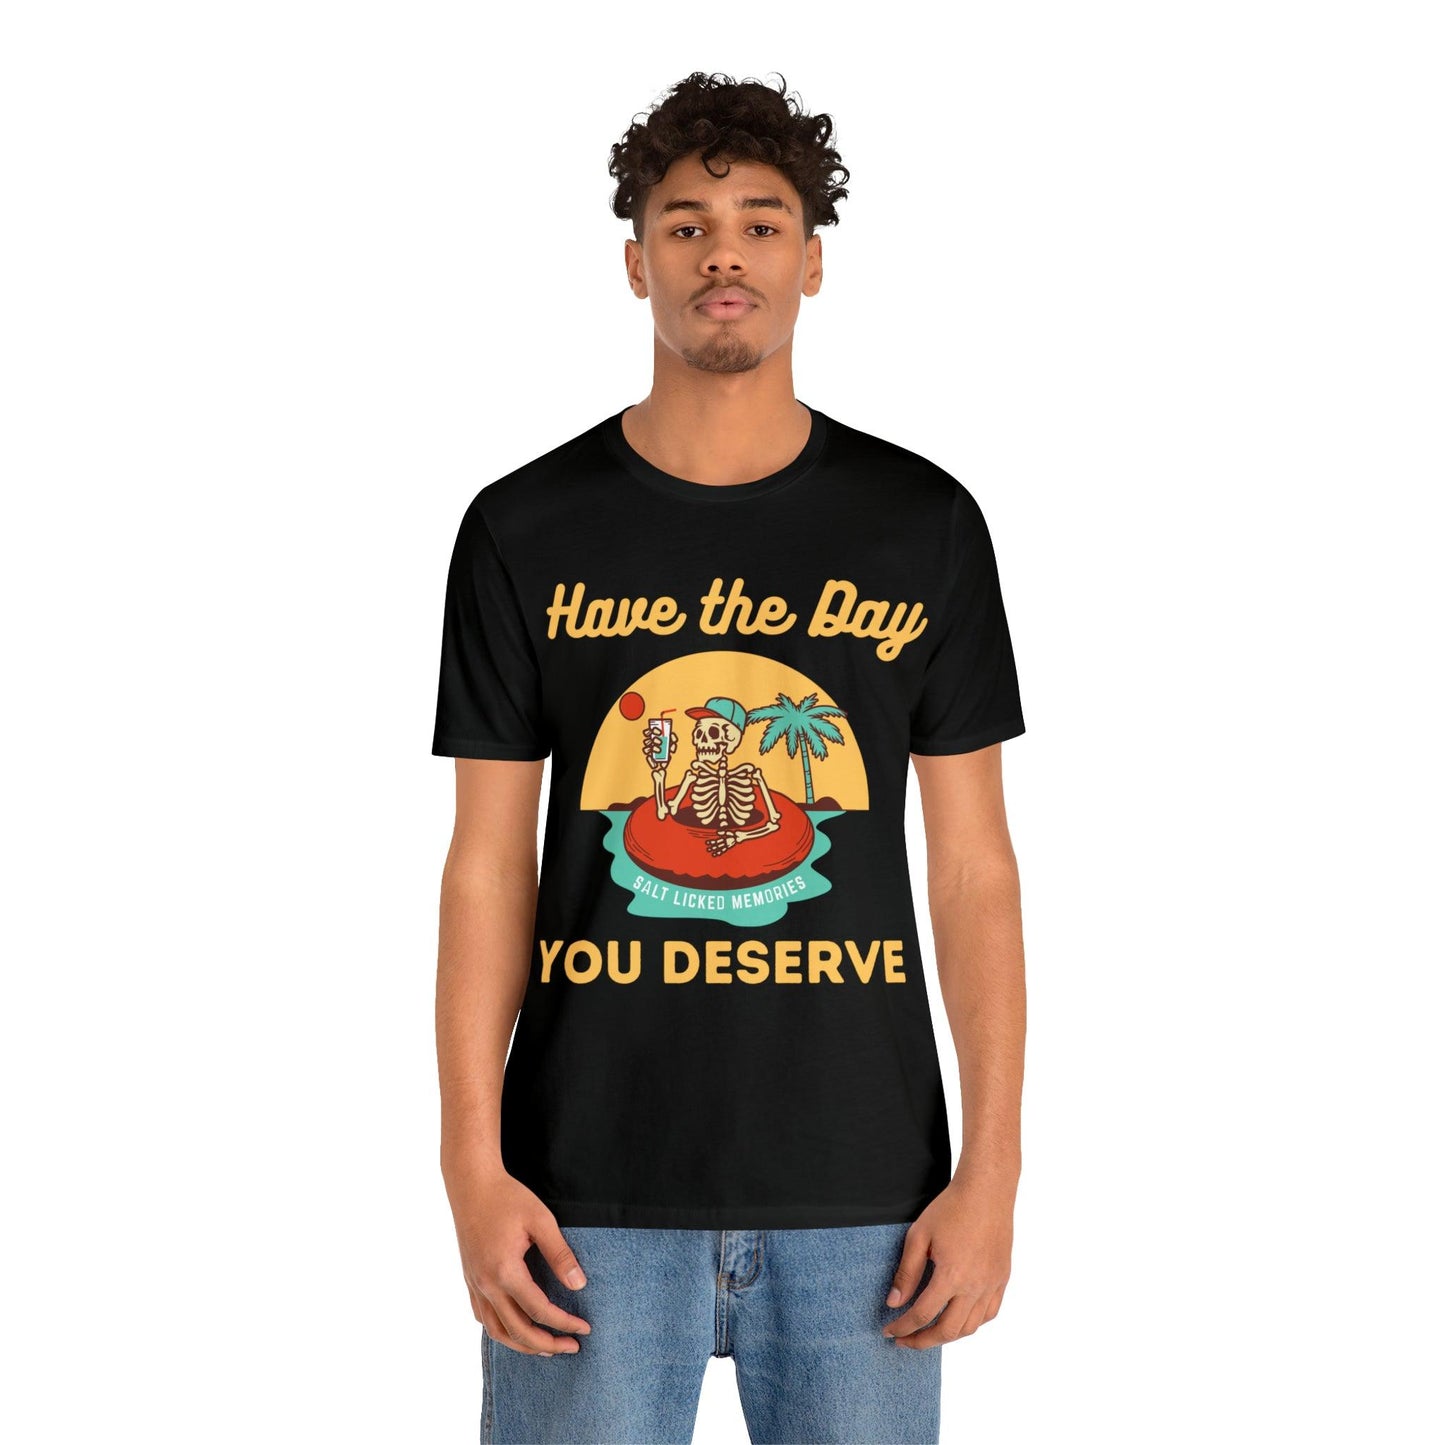 Have the Day You Deserve Shirt, Inspirational Graphic Tee, Motivational Tee, Positive Vibes Shirt, Trendy shirt and Eye Catching shirt